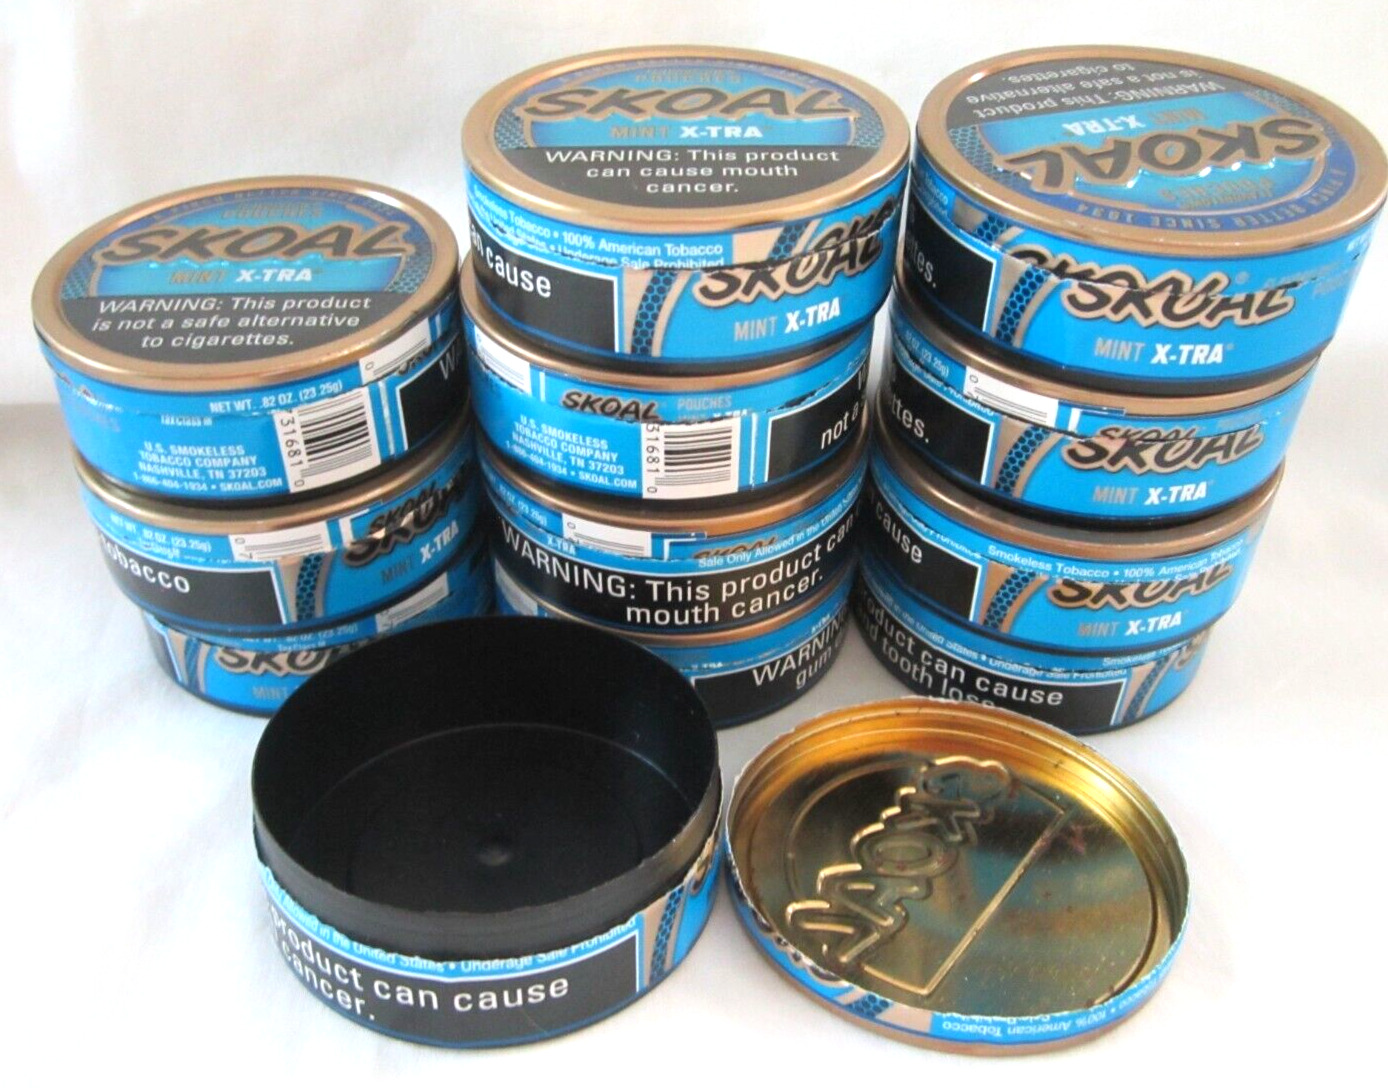 12 EMPTY SKOAL BLUE CANS Lot Crafts SMOKELESS NO TOBACCO inside TINS Mint X-TRA